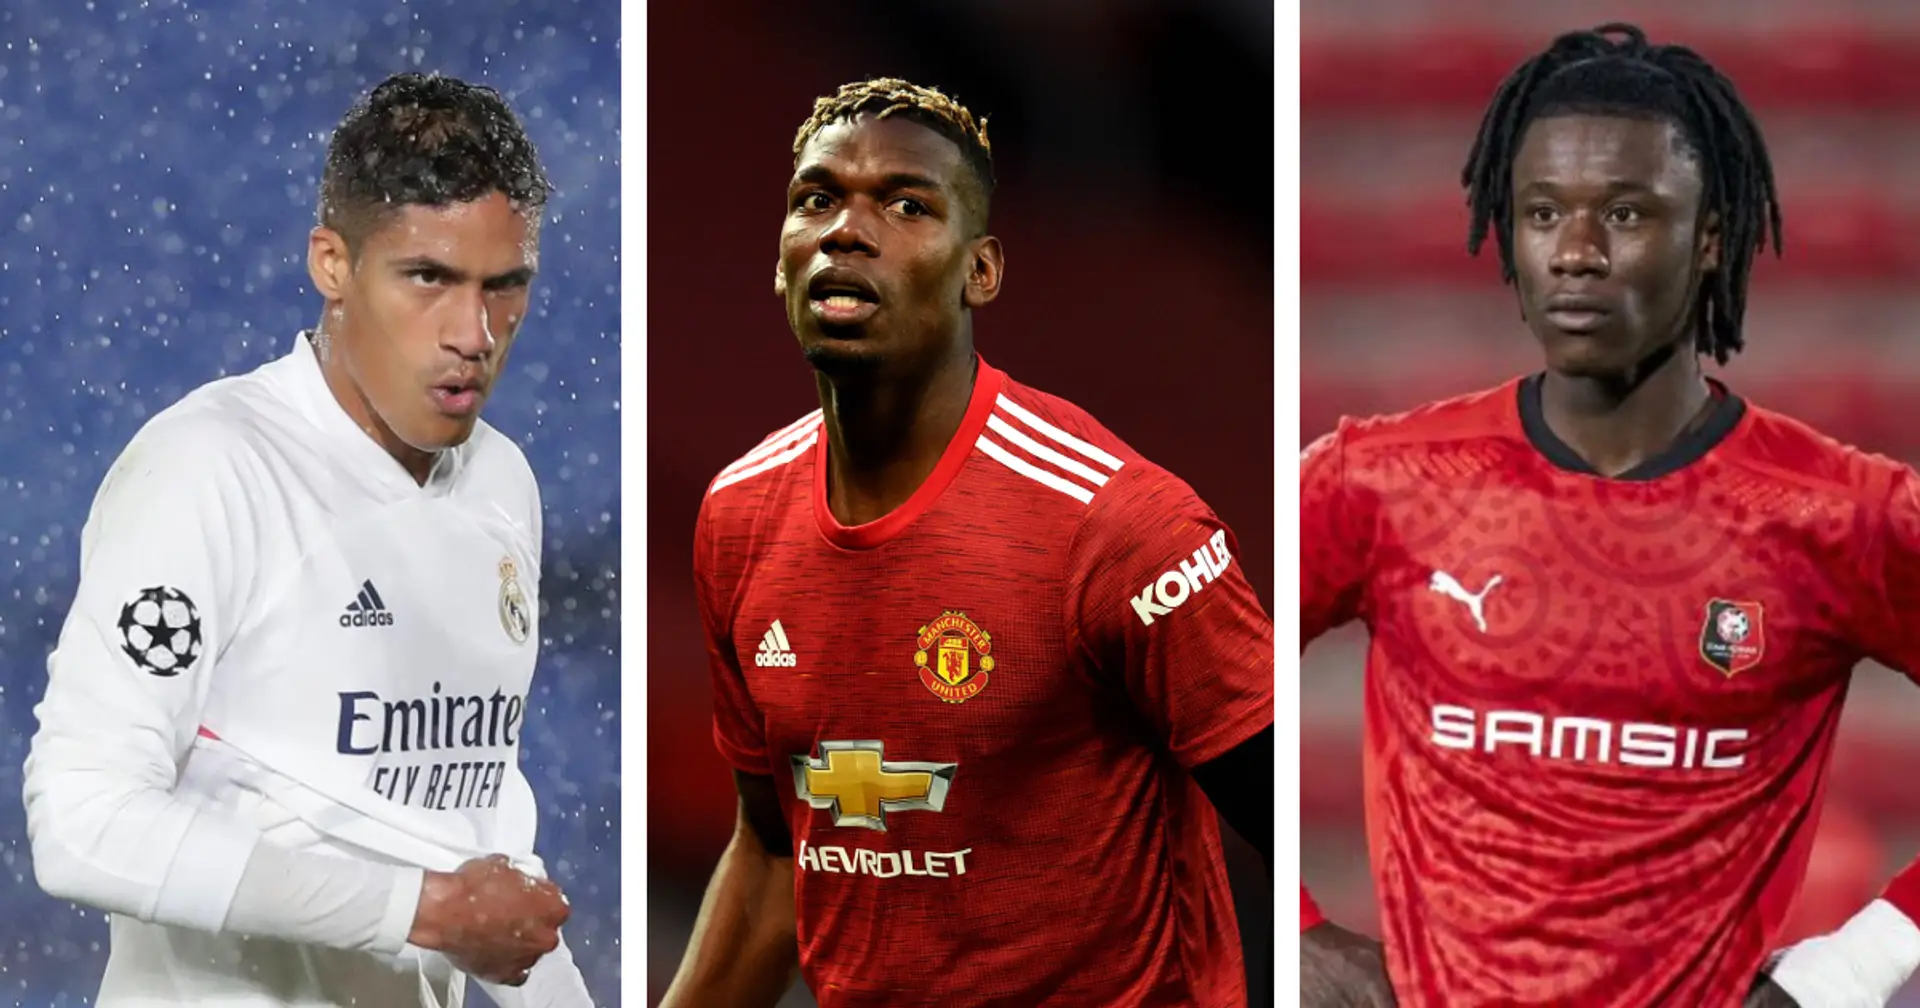 Man United transfers so far: £73m spent, 4 potential ins, 6 potential outs with probability ratings